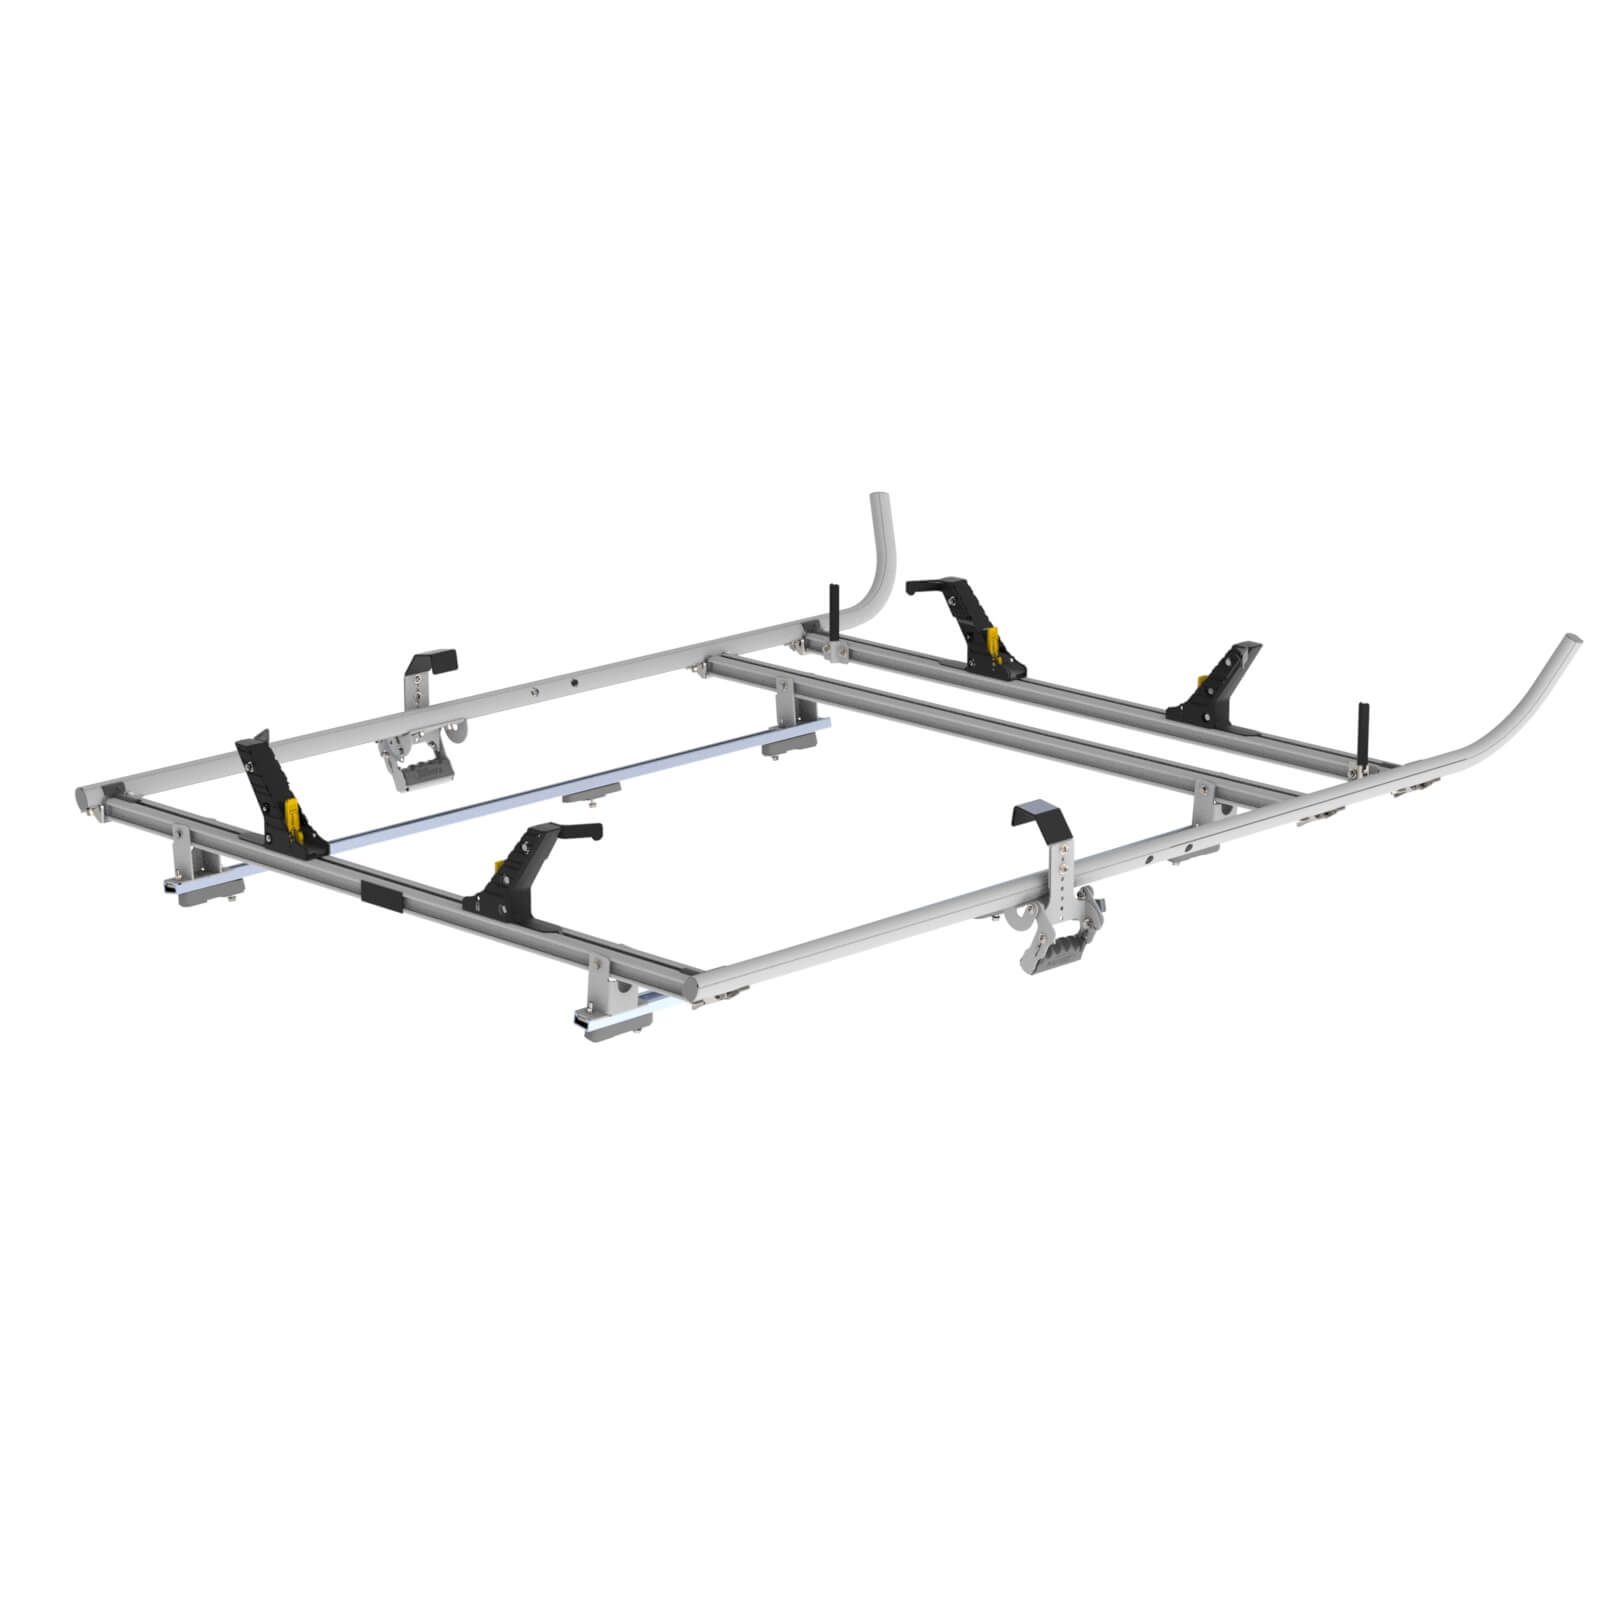 Double Clamp Ladder Rack For Ford Transit Connect Extended 2 Bar System 1630 Tcx Ranger Design